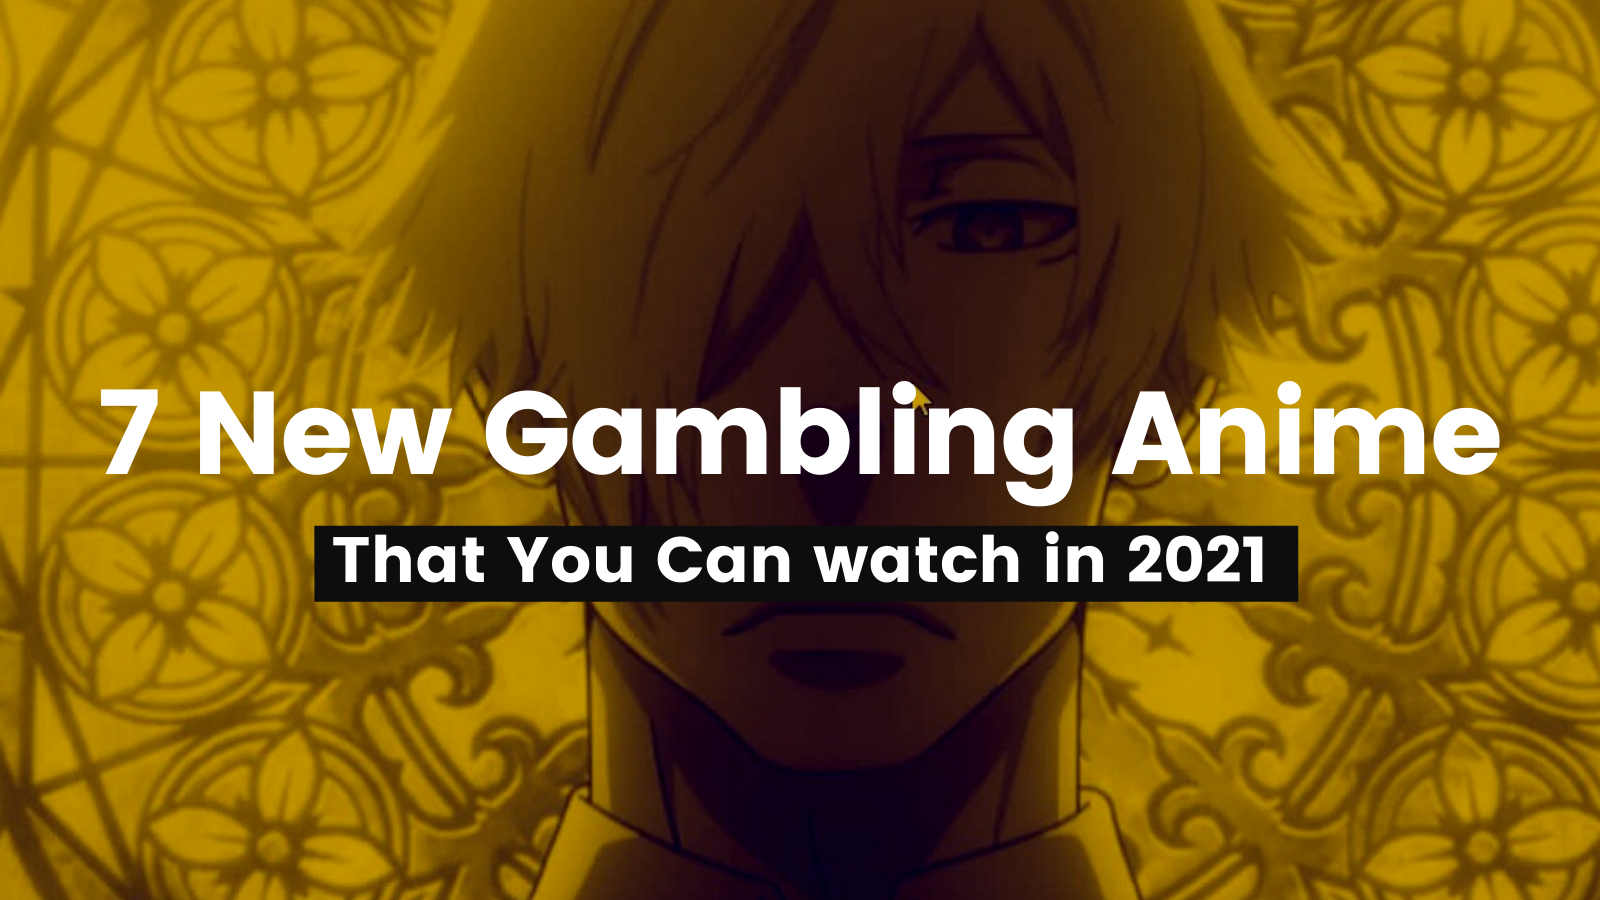 Read more about the article 7 New Gambling Anime That You Can watch in 2021<div class="yasr-vv-stars-title-container"><div class='yasr-stars-title yasr-rater-stars'
                          id='yasr-visitor-votes-readonly-rater-2b5e2328f16da'
                          data-rating='0'
                          data-rater-starsize='16'
                          data-rater-postid='2689'
                          data-rater-readonly='true'
                          data-readonly-attribute='true'
                      ></div><span class='yasr-stars-title-average'>0 (0)</span></div>